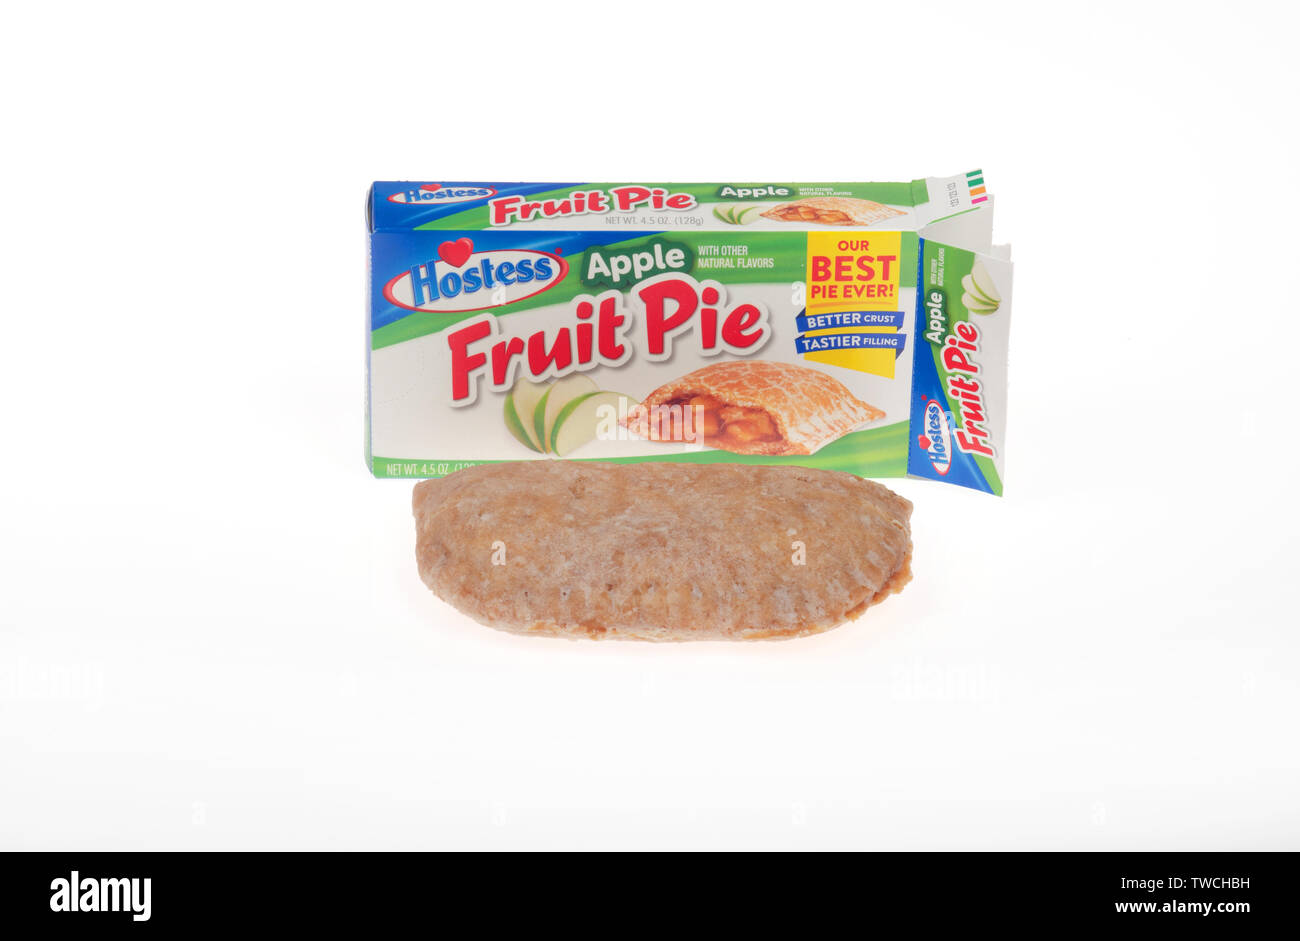 Hostess brand apple fruit pie with opened box showing pie Stock Photo